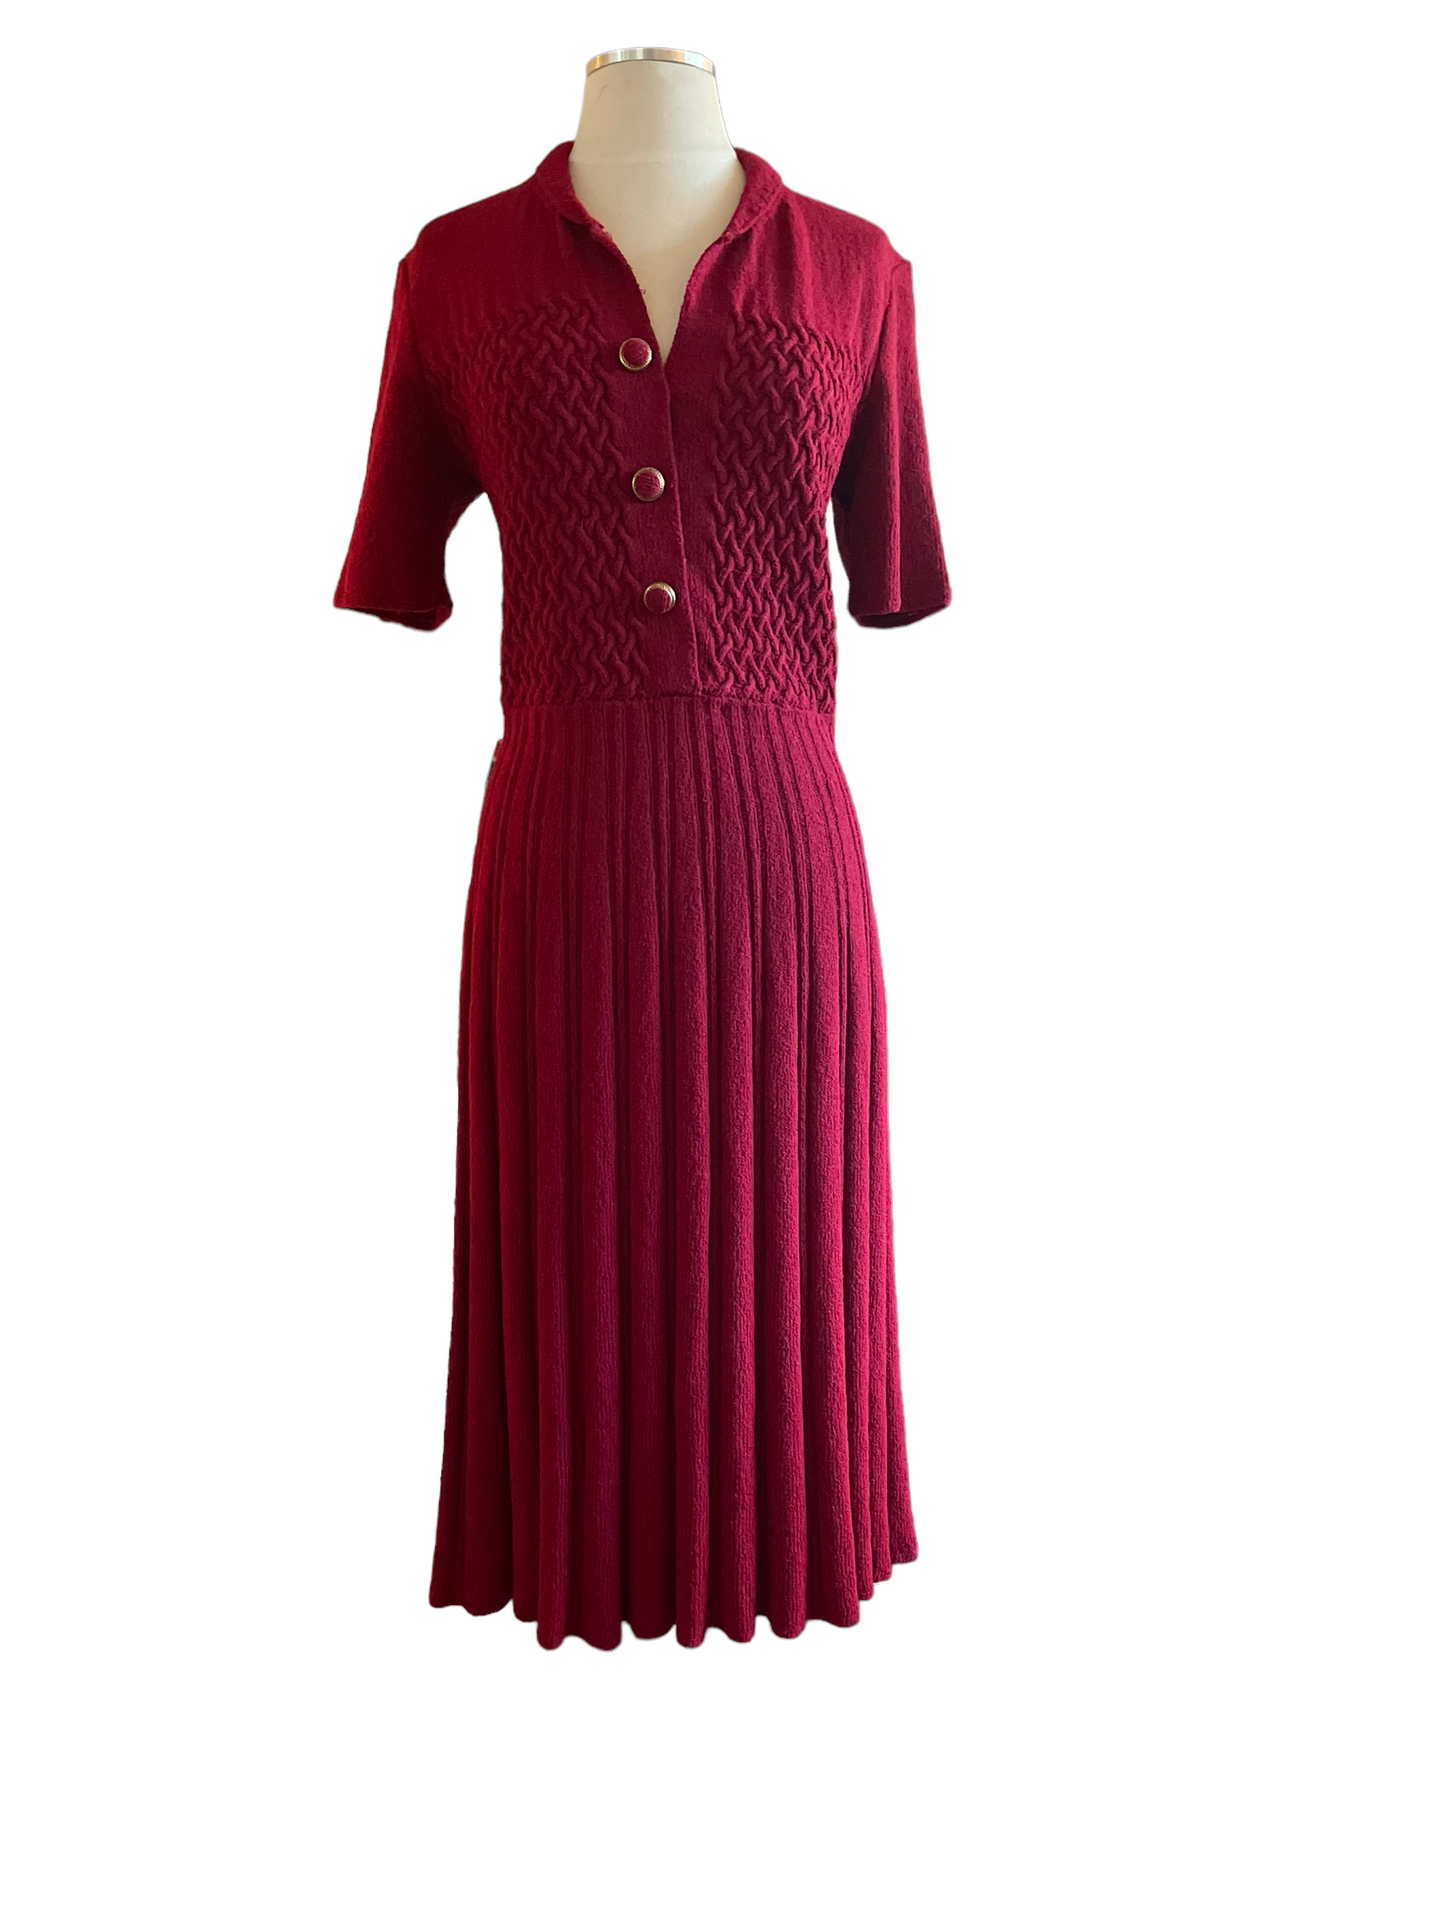 Front View of Vintage 1940s Hand-Knit Red Dress SZ S |  Barn Owl Vintage | Seattle Vintage Dresses